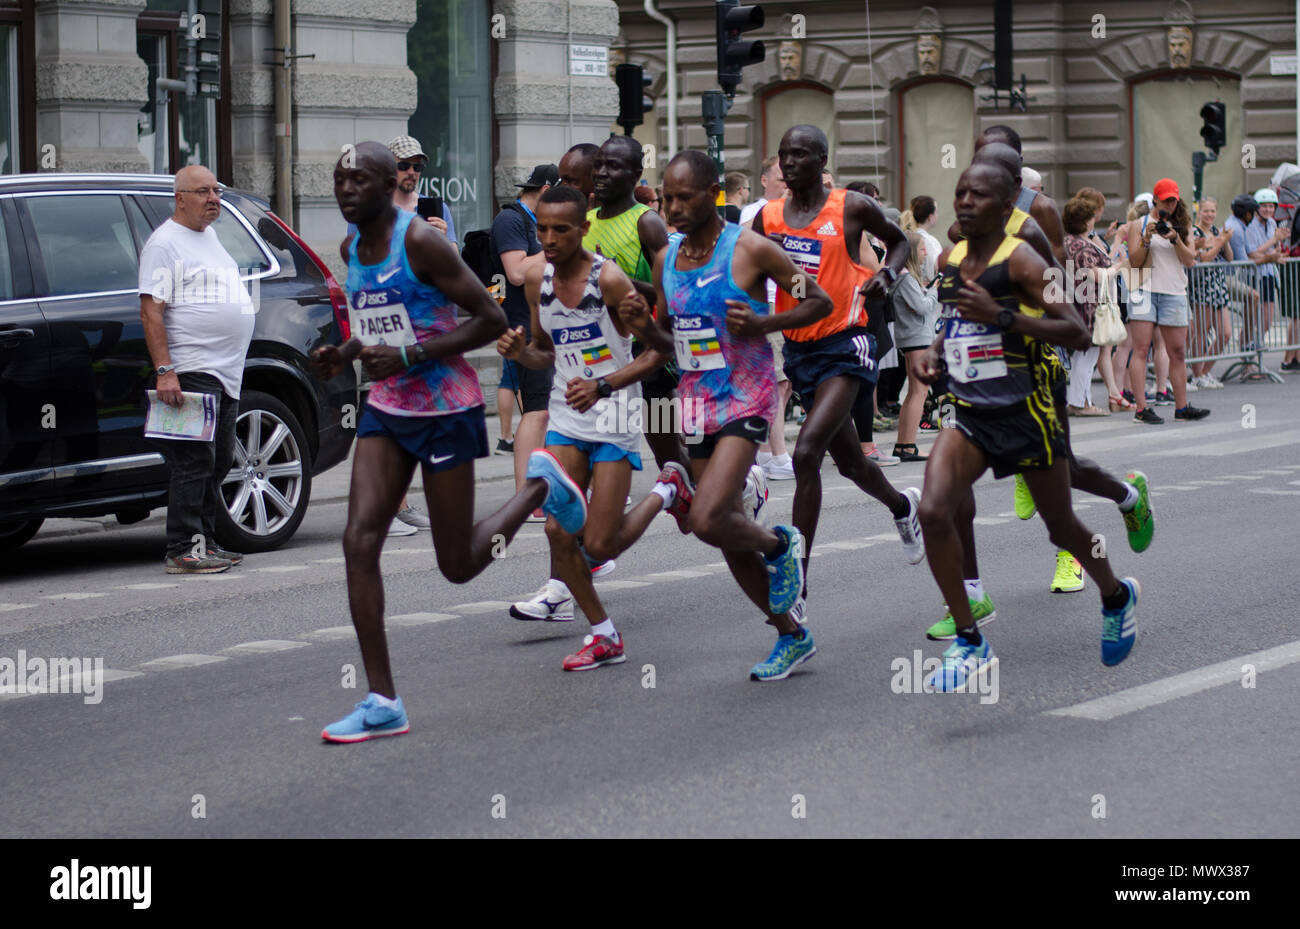 Stockholm, Sweden. 2nd June 2018. The chasing group after 46 minutes of the 40th Stockholm marathon 2018 in very hot conditions. Credit: Jari Juntunen/Alamy Live News Credit: Jari Juntunen/Alamy Live News Credit: Jari Juntunen/Alamy Live News Stock Photo